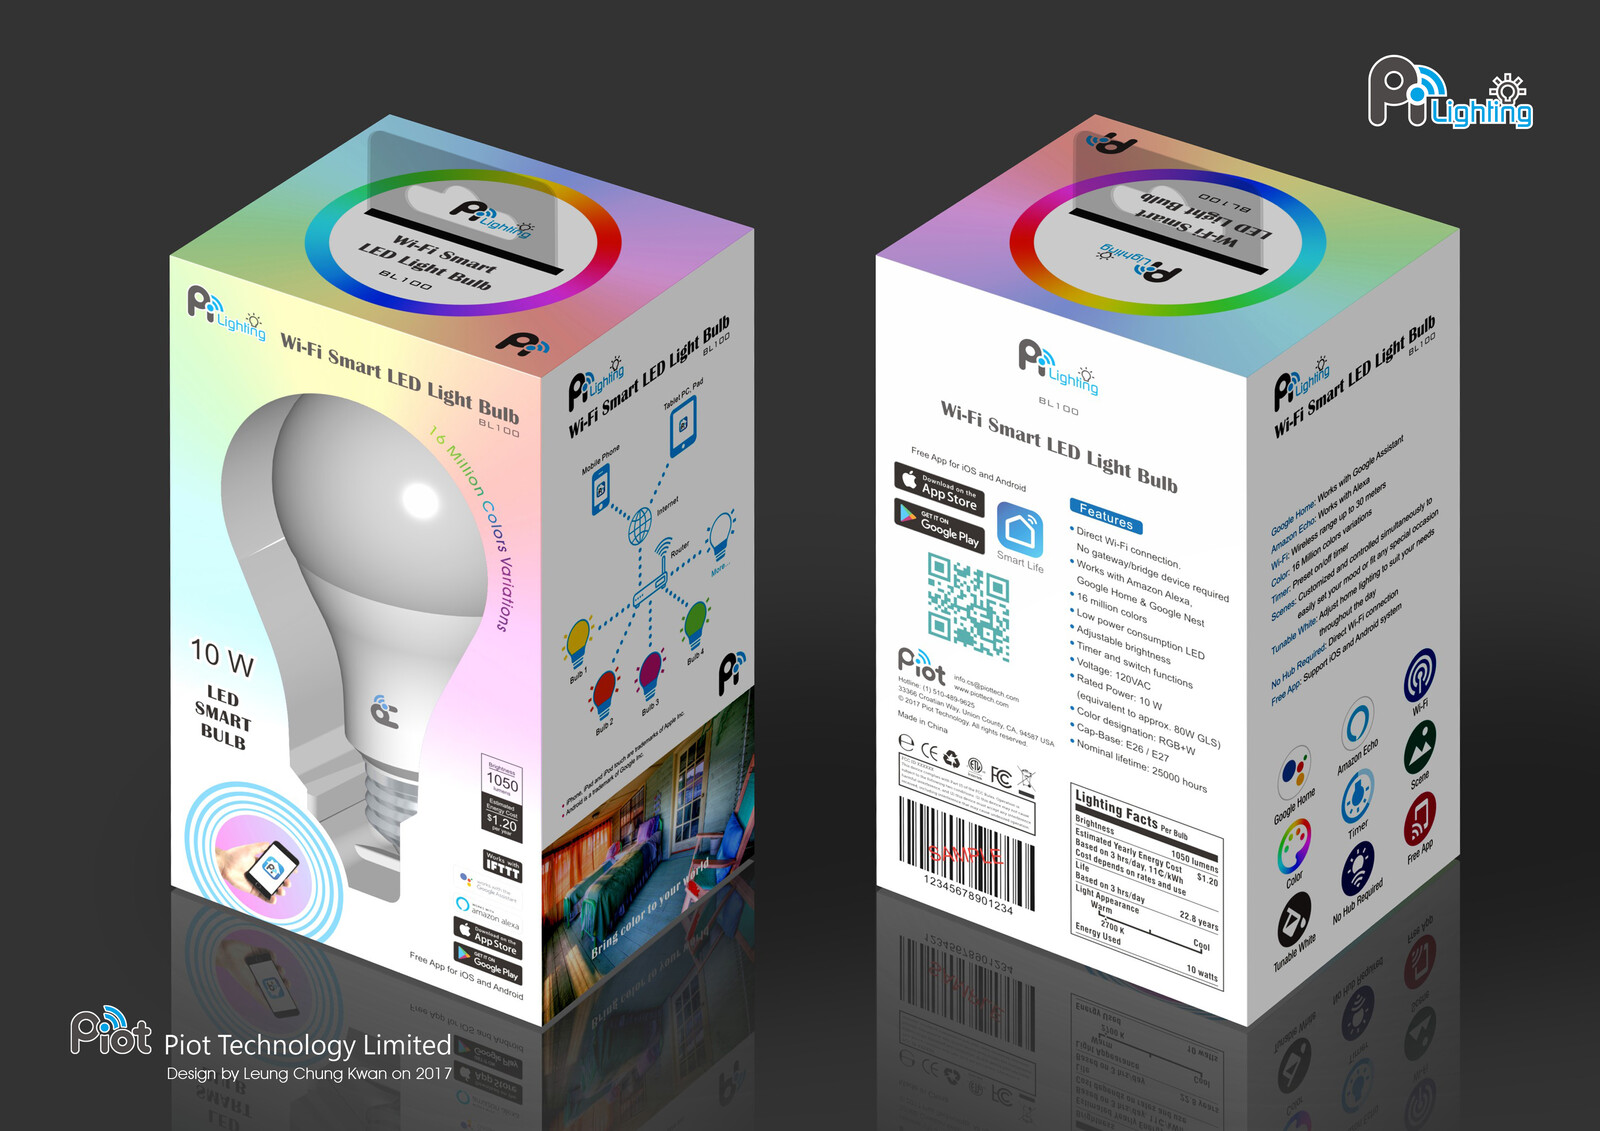 💎 Color Gift Box | Design by Leung Chung Kwan on 2017 💎
Product︰Wi-Fi Smart LED Light Bulb BL100 | Product Name︰Pi Lighting
Brand Name︰Piot | Client︰Piot Technology Limited
Graphic Design Specification︰http://bit.ly/pi065-v4